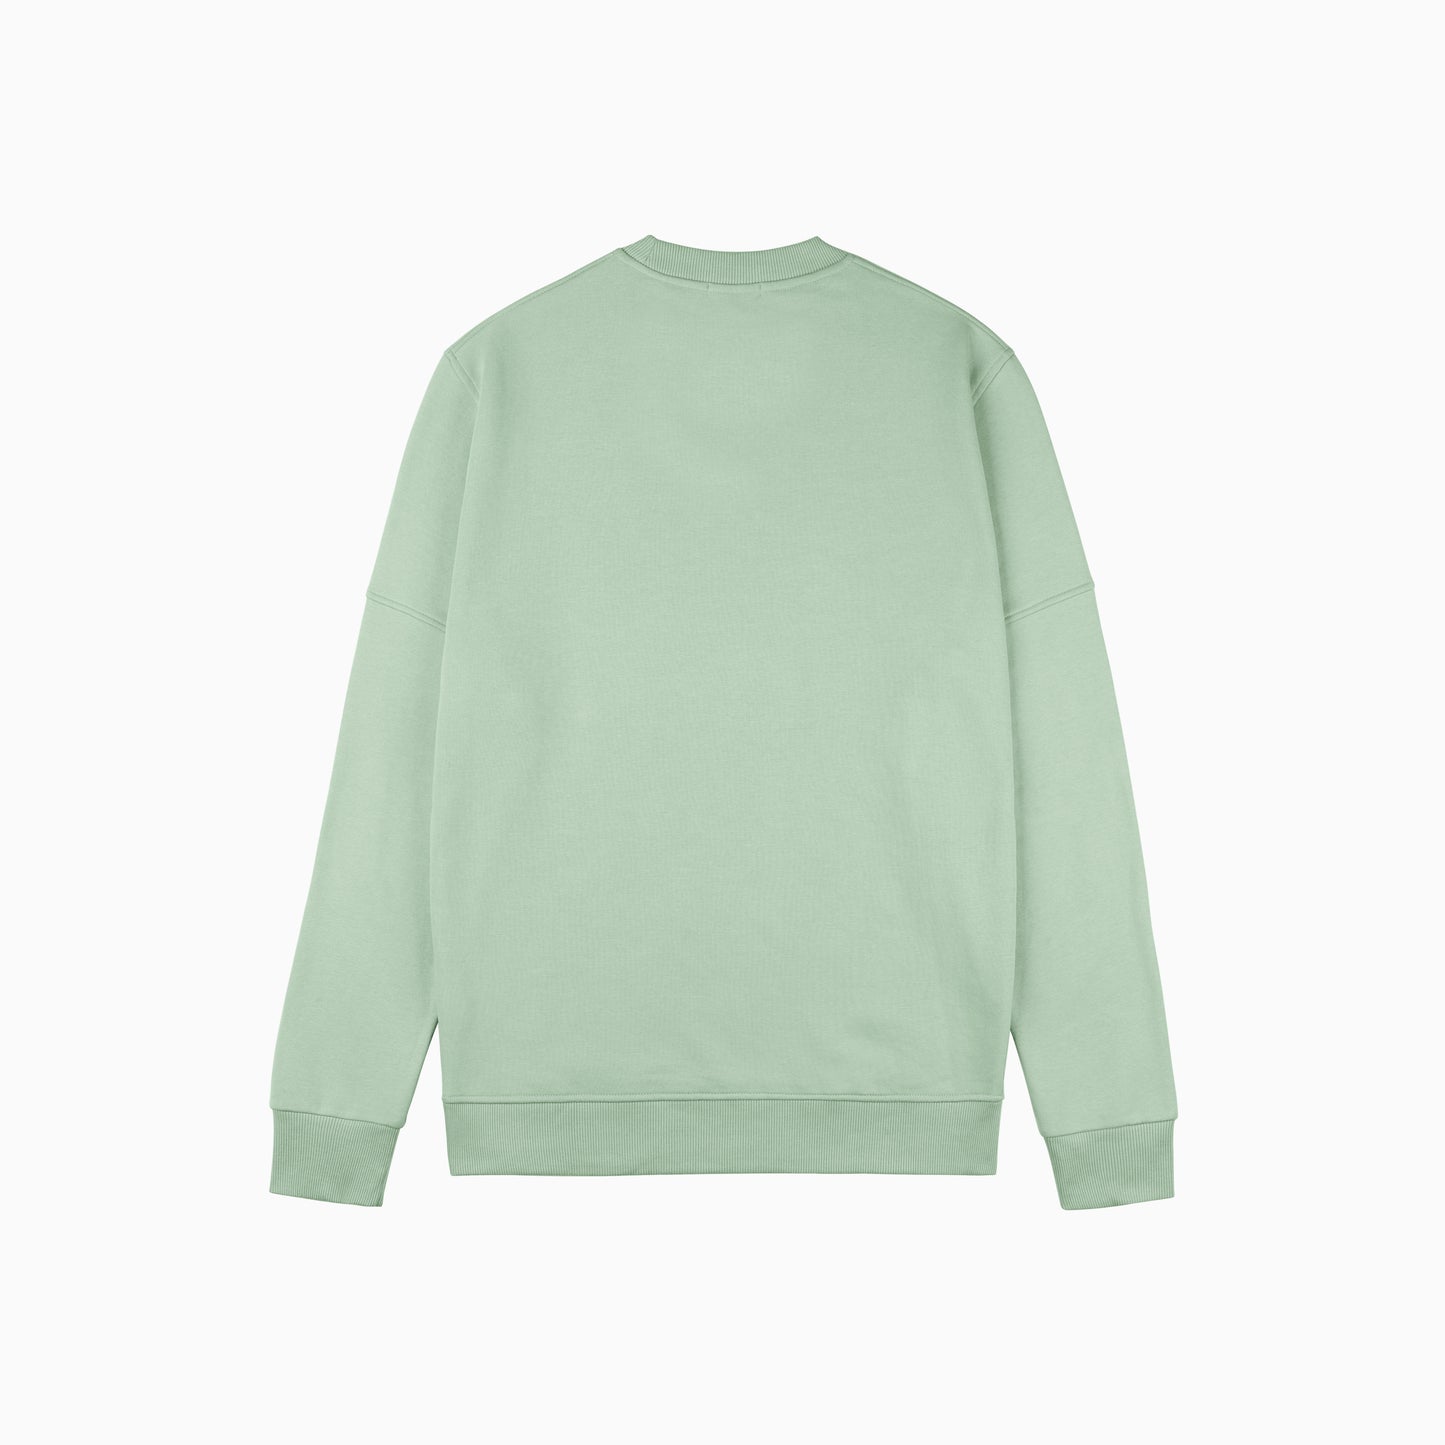 CROYEZ ABSTRACT SWEATER - SILT GREEN